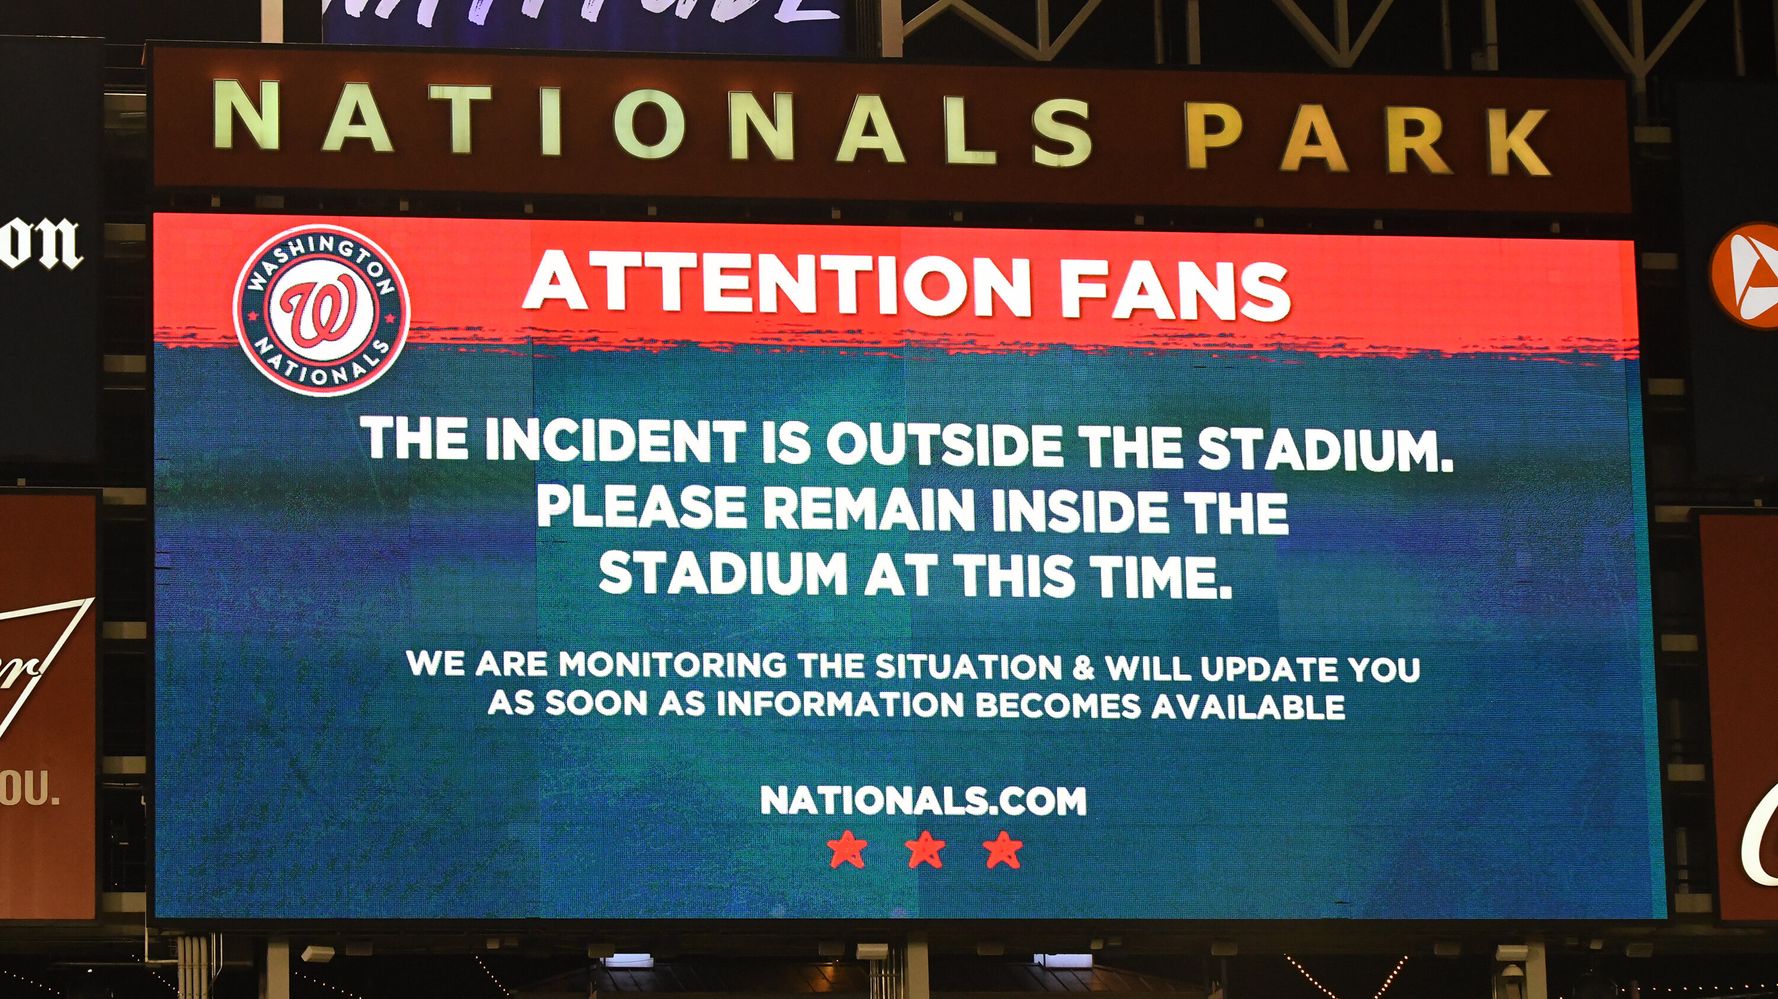 Baseball Game Halted After Nationals Said A Shooting Was Reported Outside The Stadium